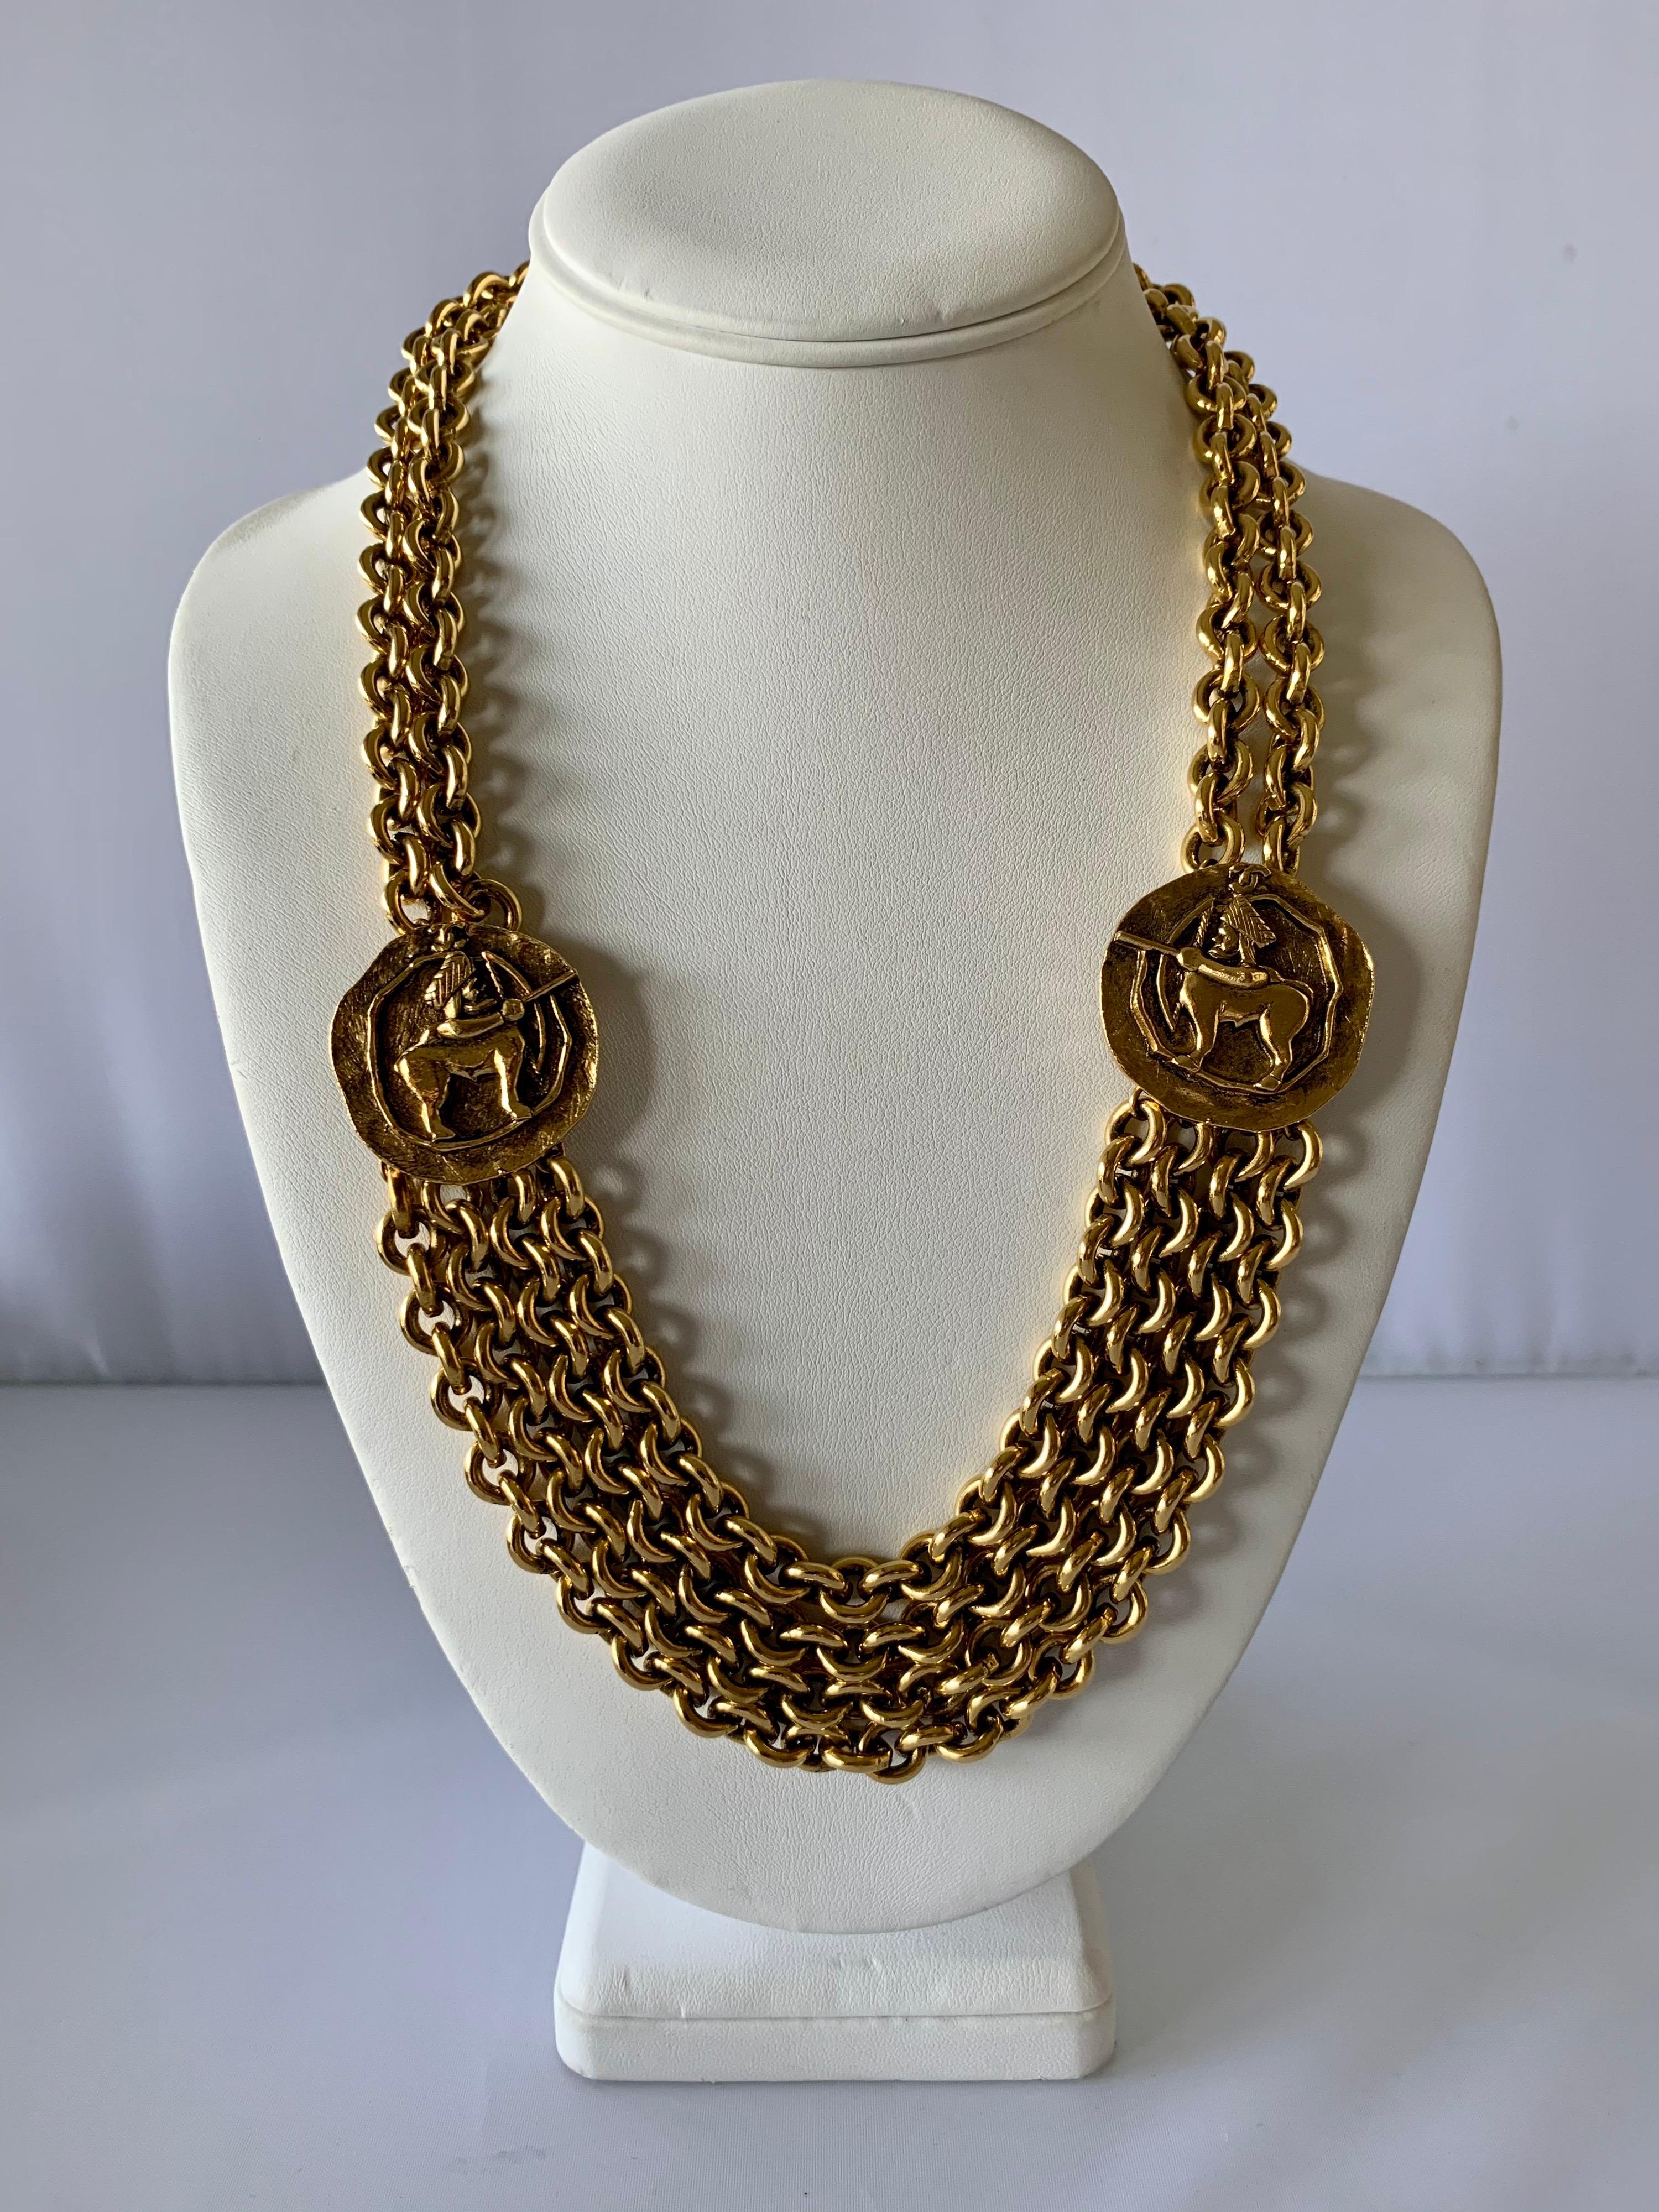 Spectacular vintage  Maison Goossens for Coco Chanel zodiac inspired multi strand statement necklace -  comprised out of 